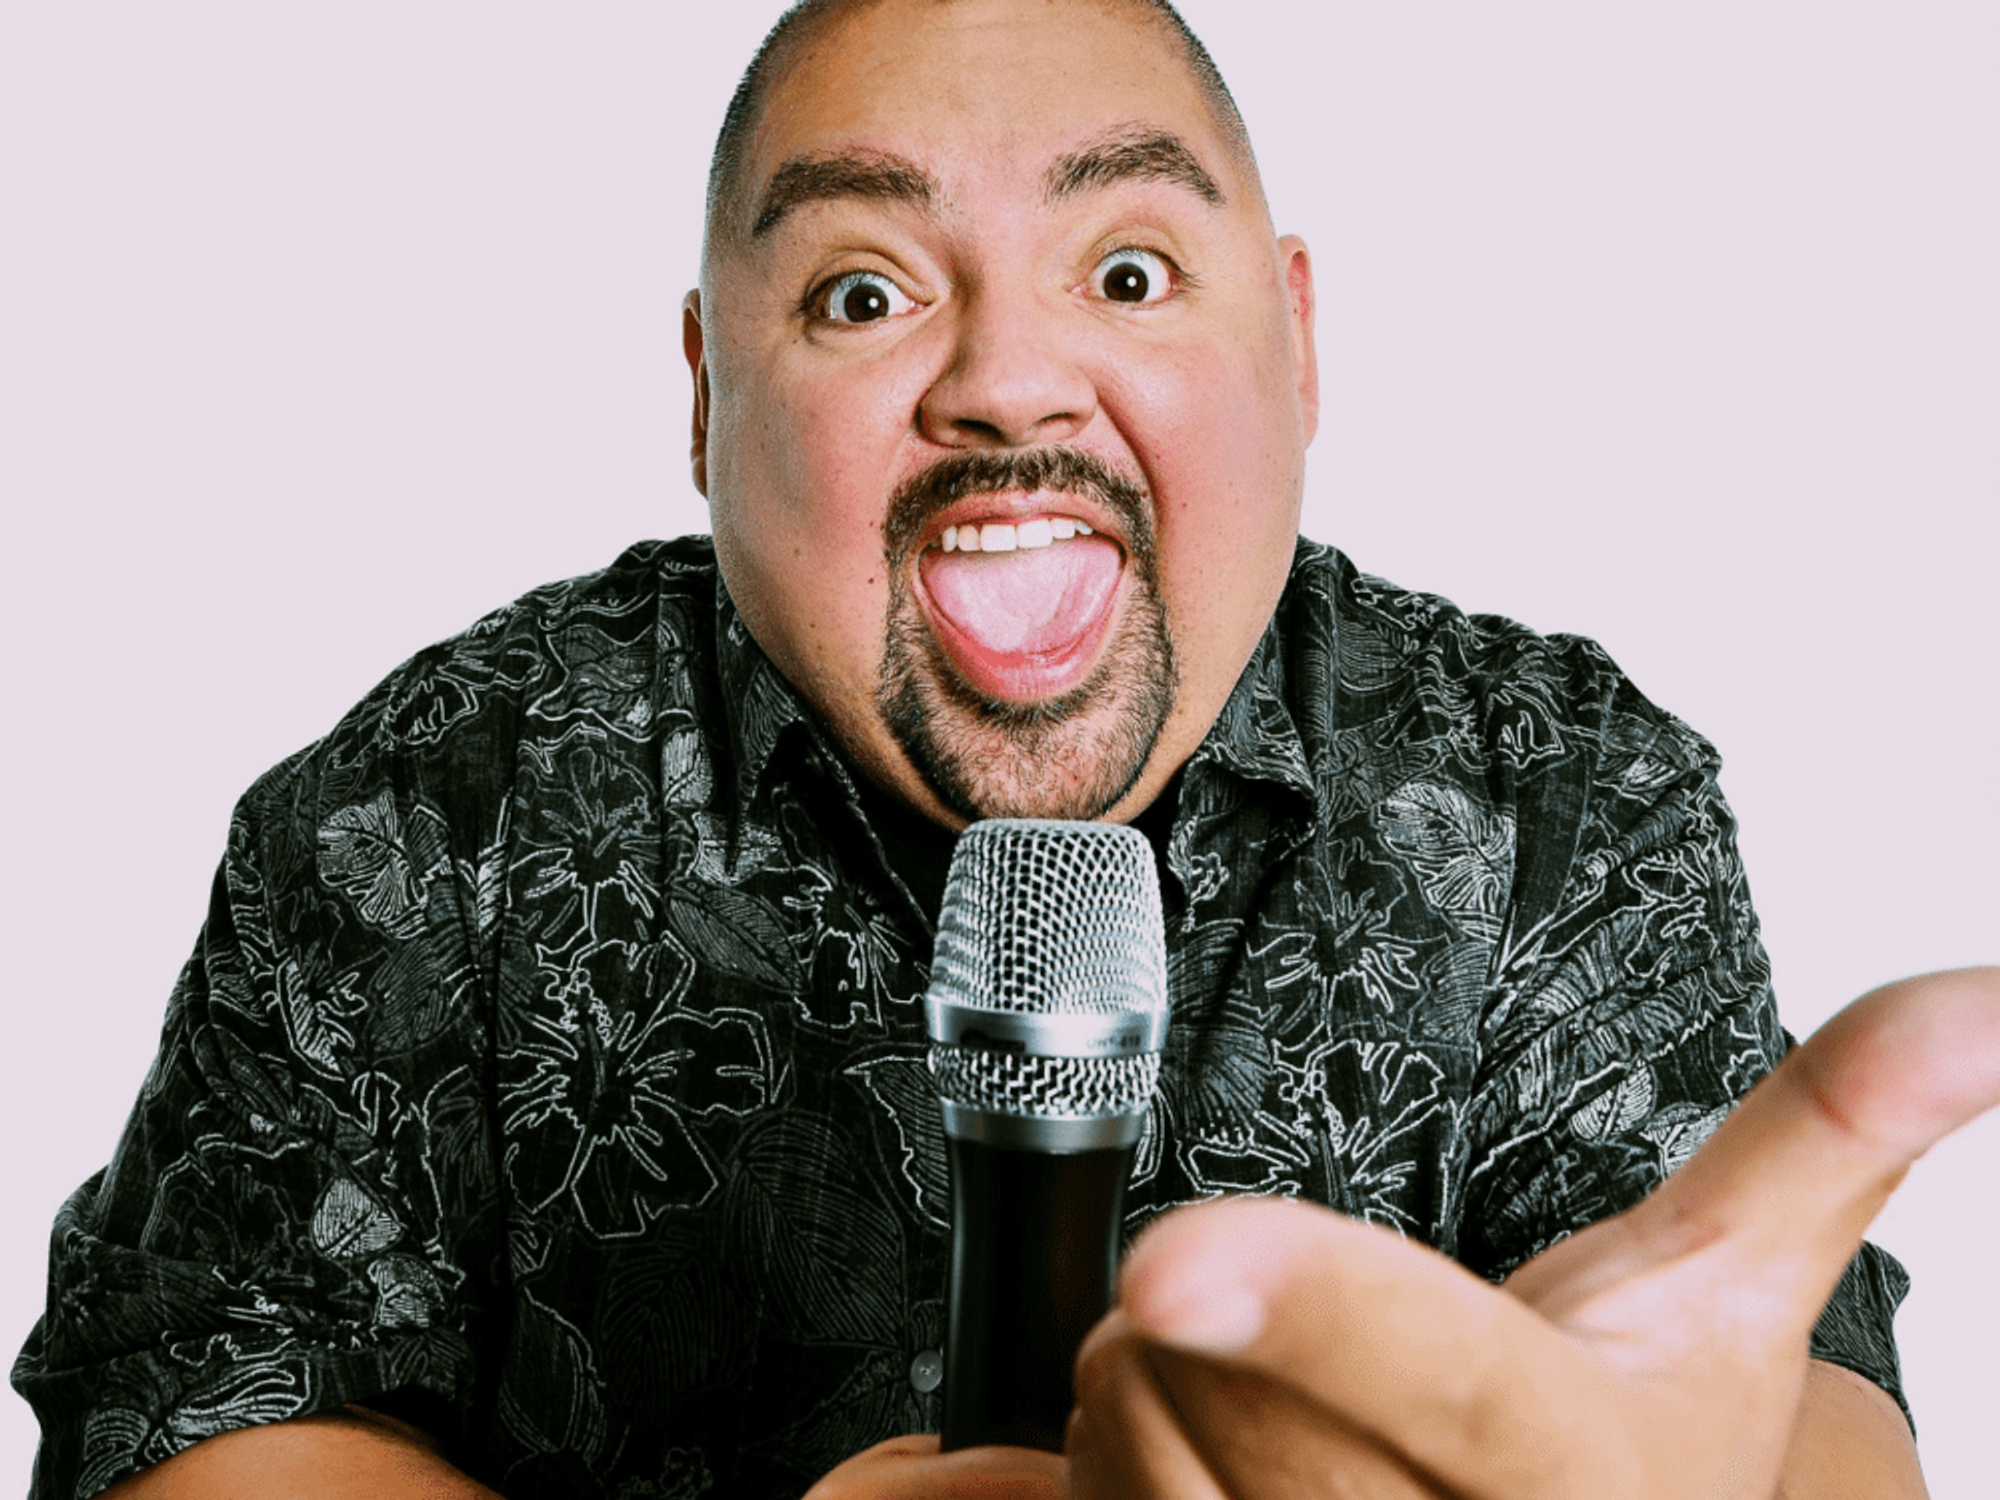 Gabriel “Fluffy” Iglesias will perform at American Airlines Center on January 22.